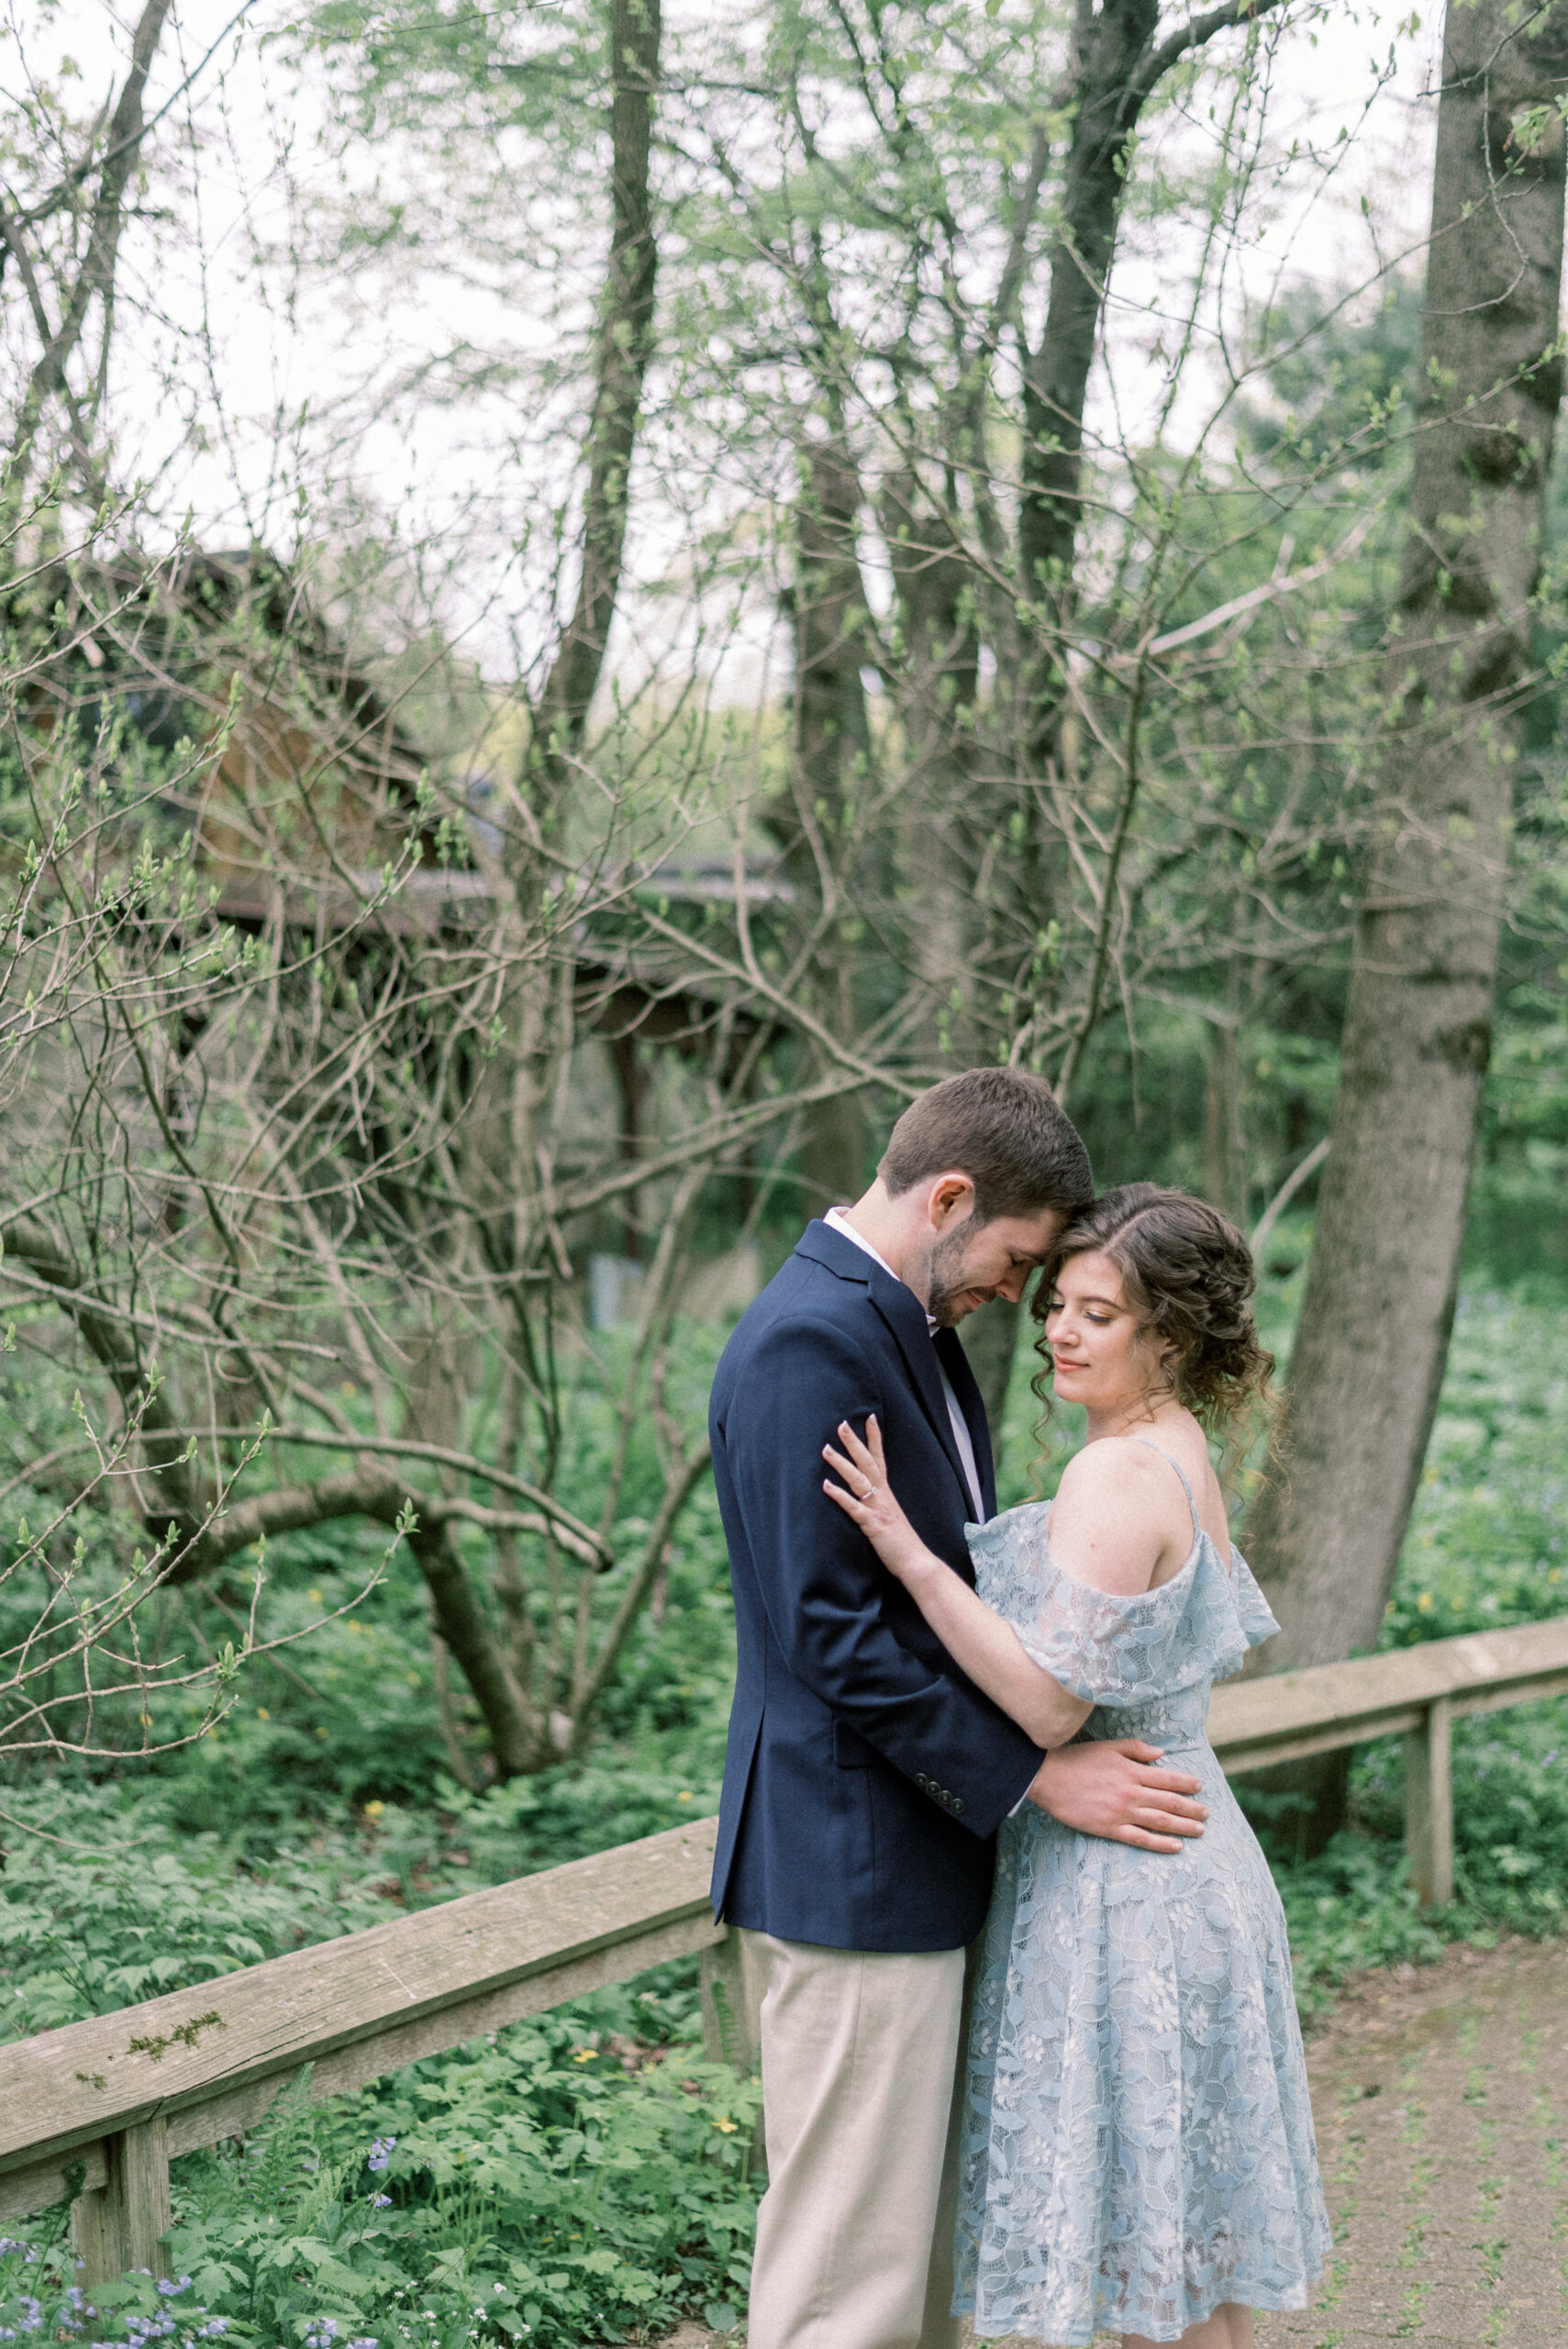 Maryland wedding photographer captures newly engaged couple hugging in forest